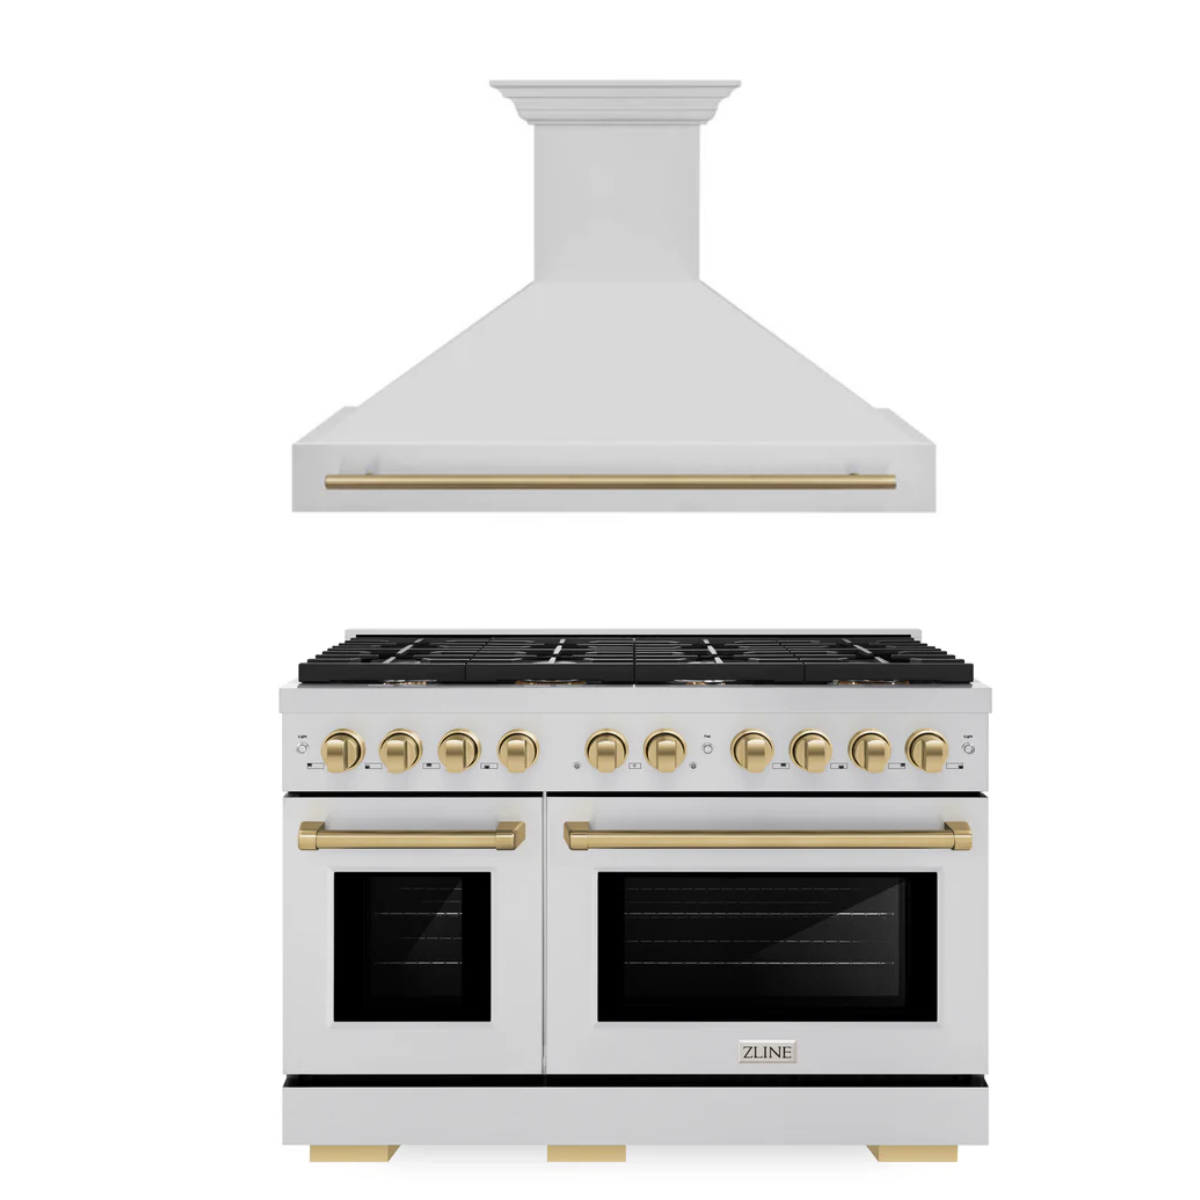 ZLINE Autograph Package - 48 In. Gas Range and Range Hood in Stainless Steel with Champagne Bronze Accents, 2AKPR-RGRH48-CB